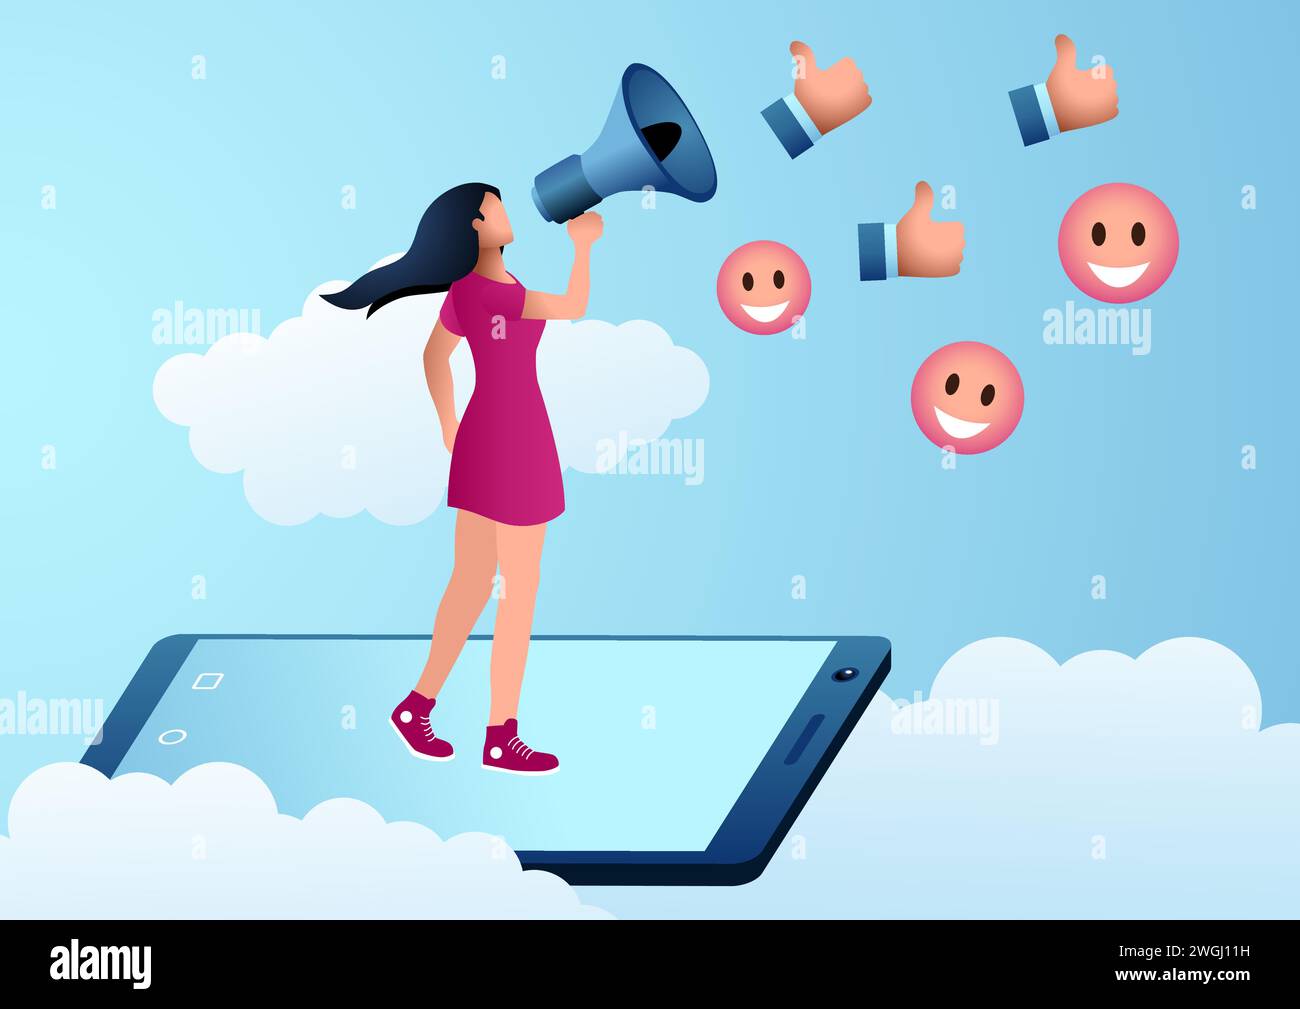 Female figure standing on smartphone using megaphone to attract likes on social media, influencer, beauty flogger, self promotion on social media, vec Stock Vector